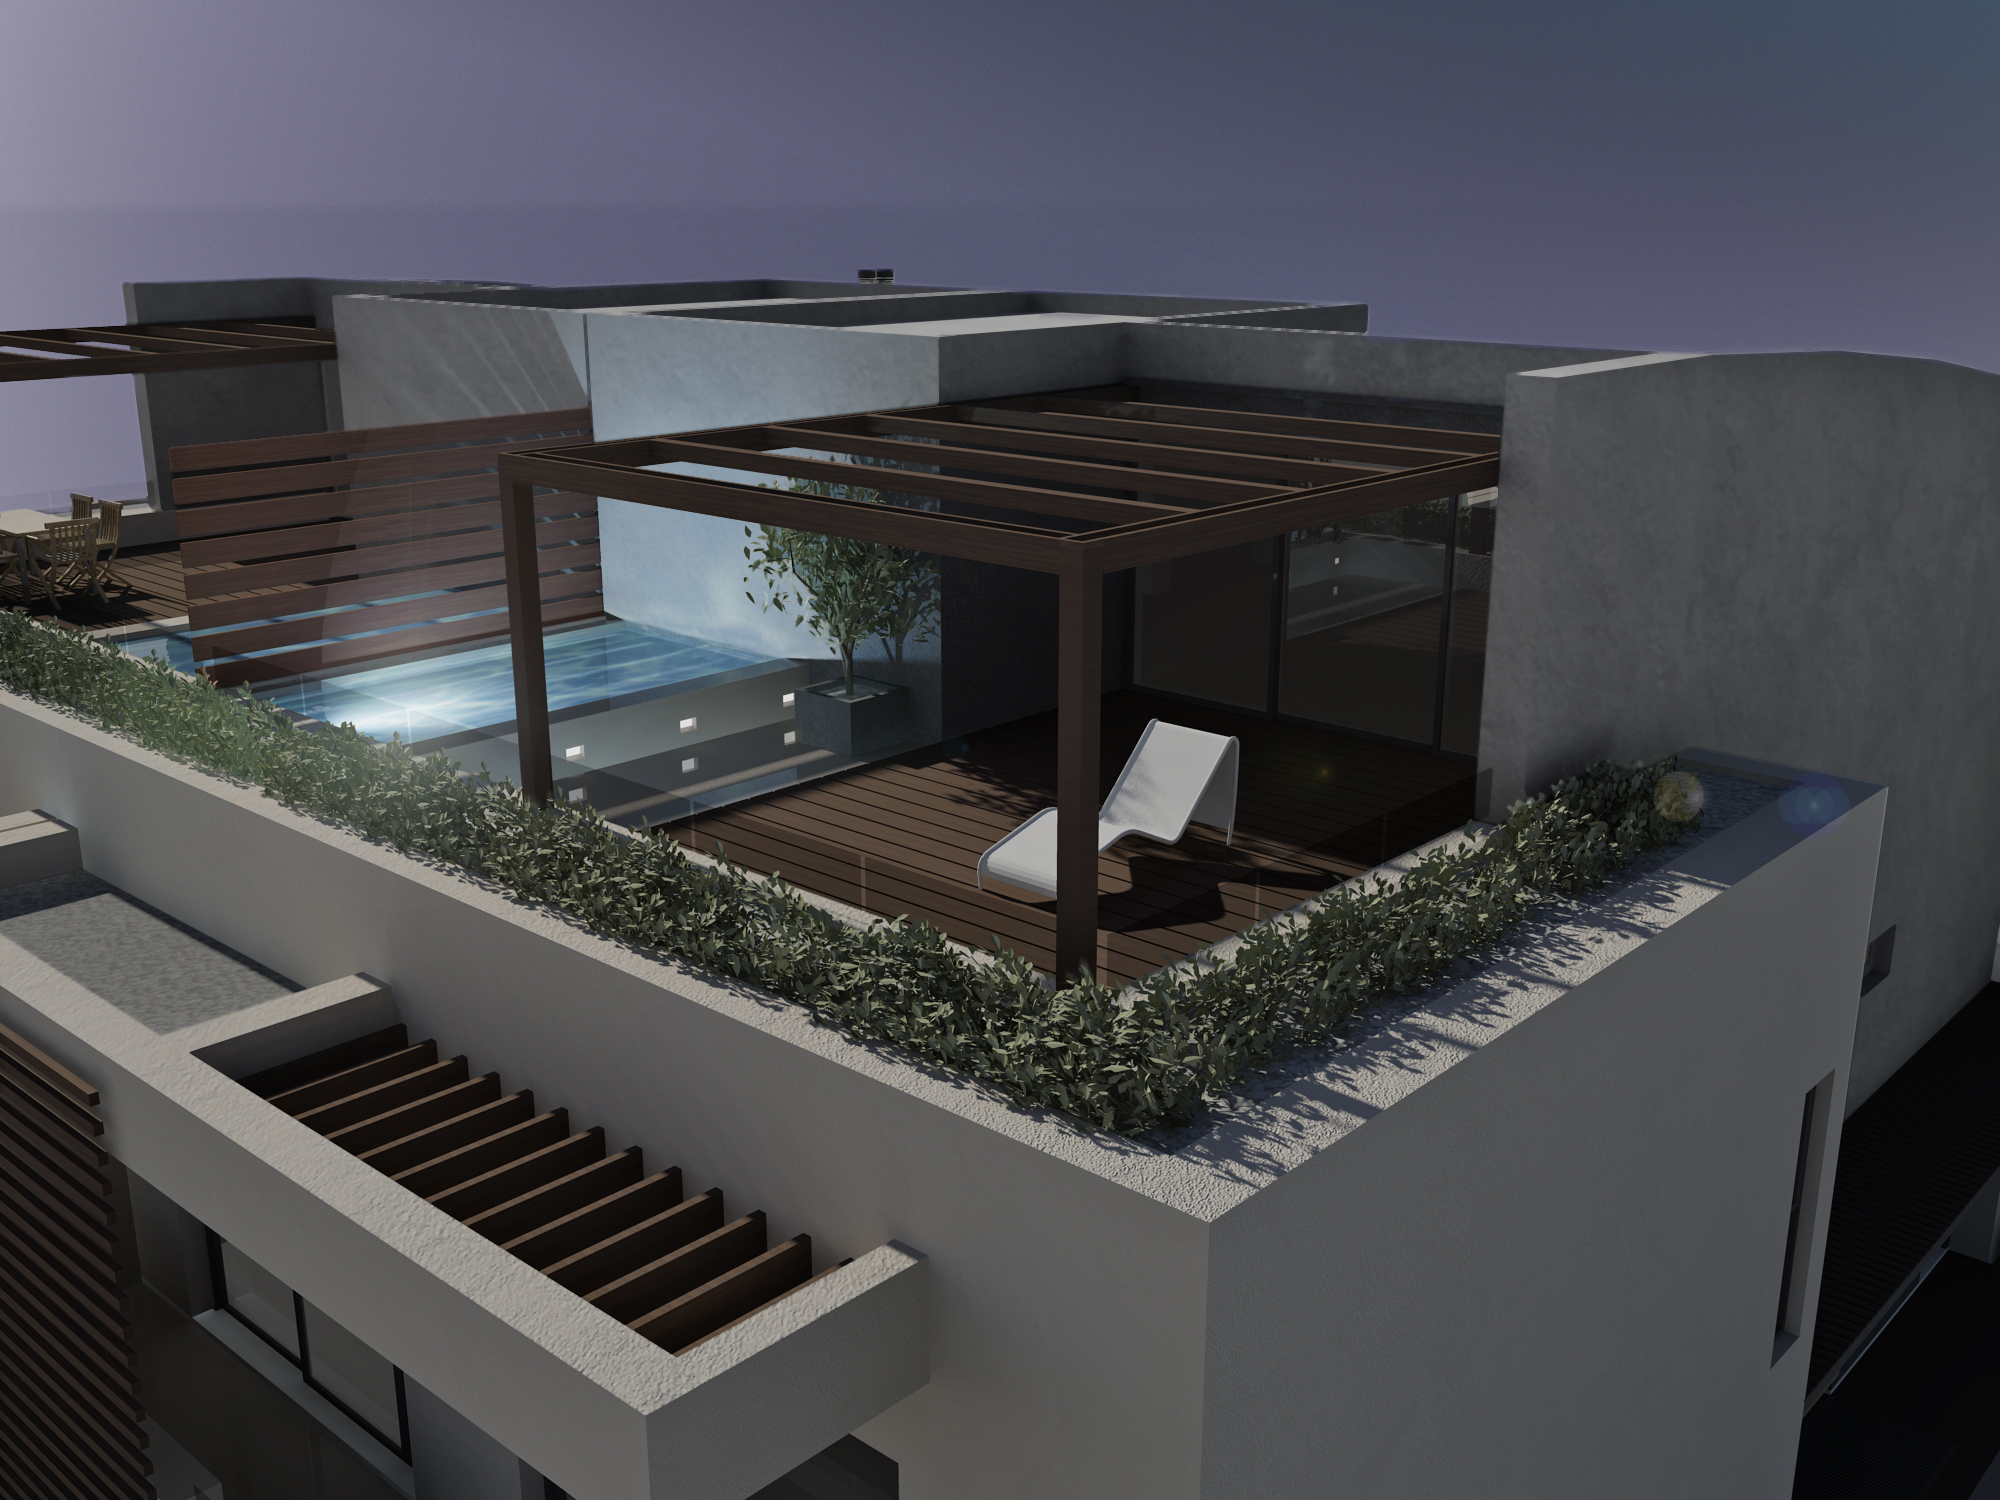 HOUSE IN KIFISSIA